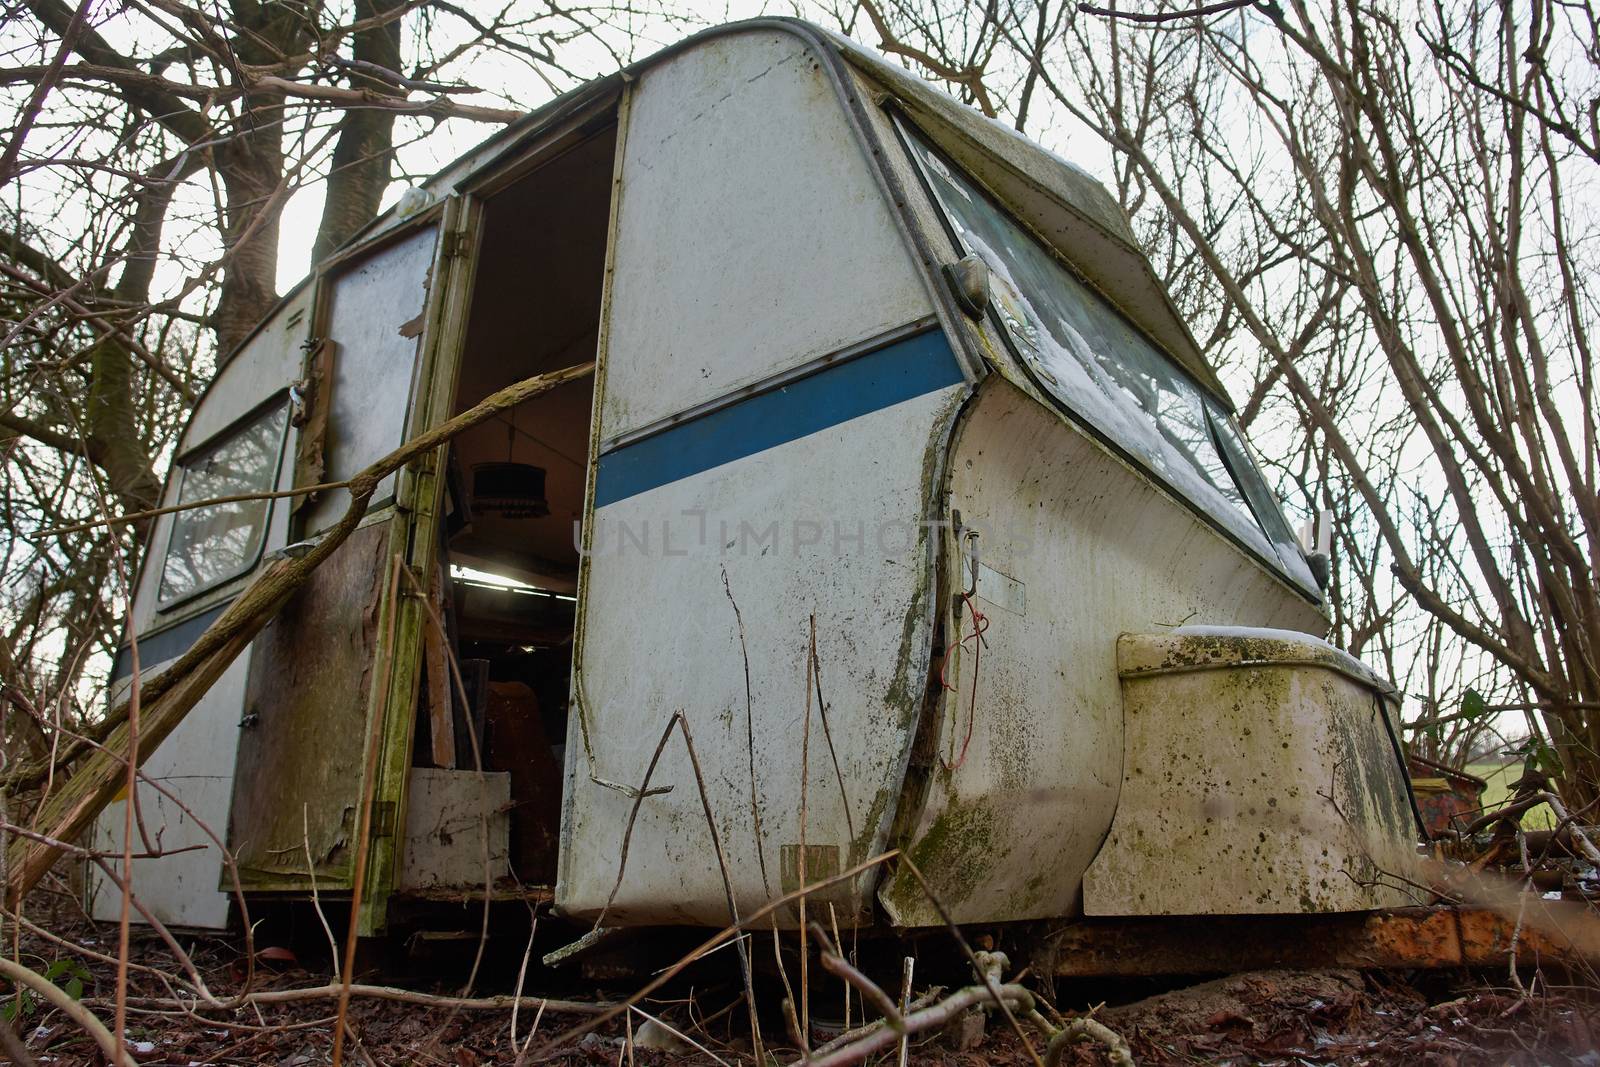 Old Vintage Dirty Abandoned Camper Camping Wagon Caravan  in a small forest